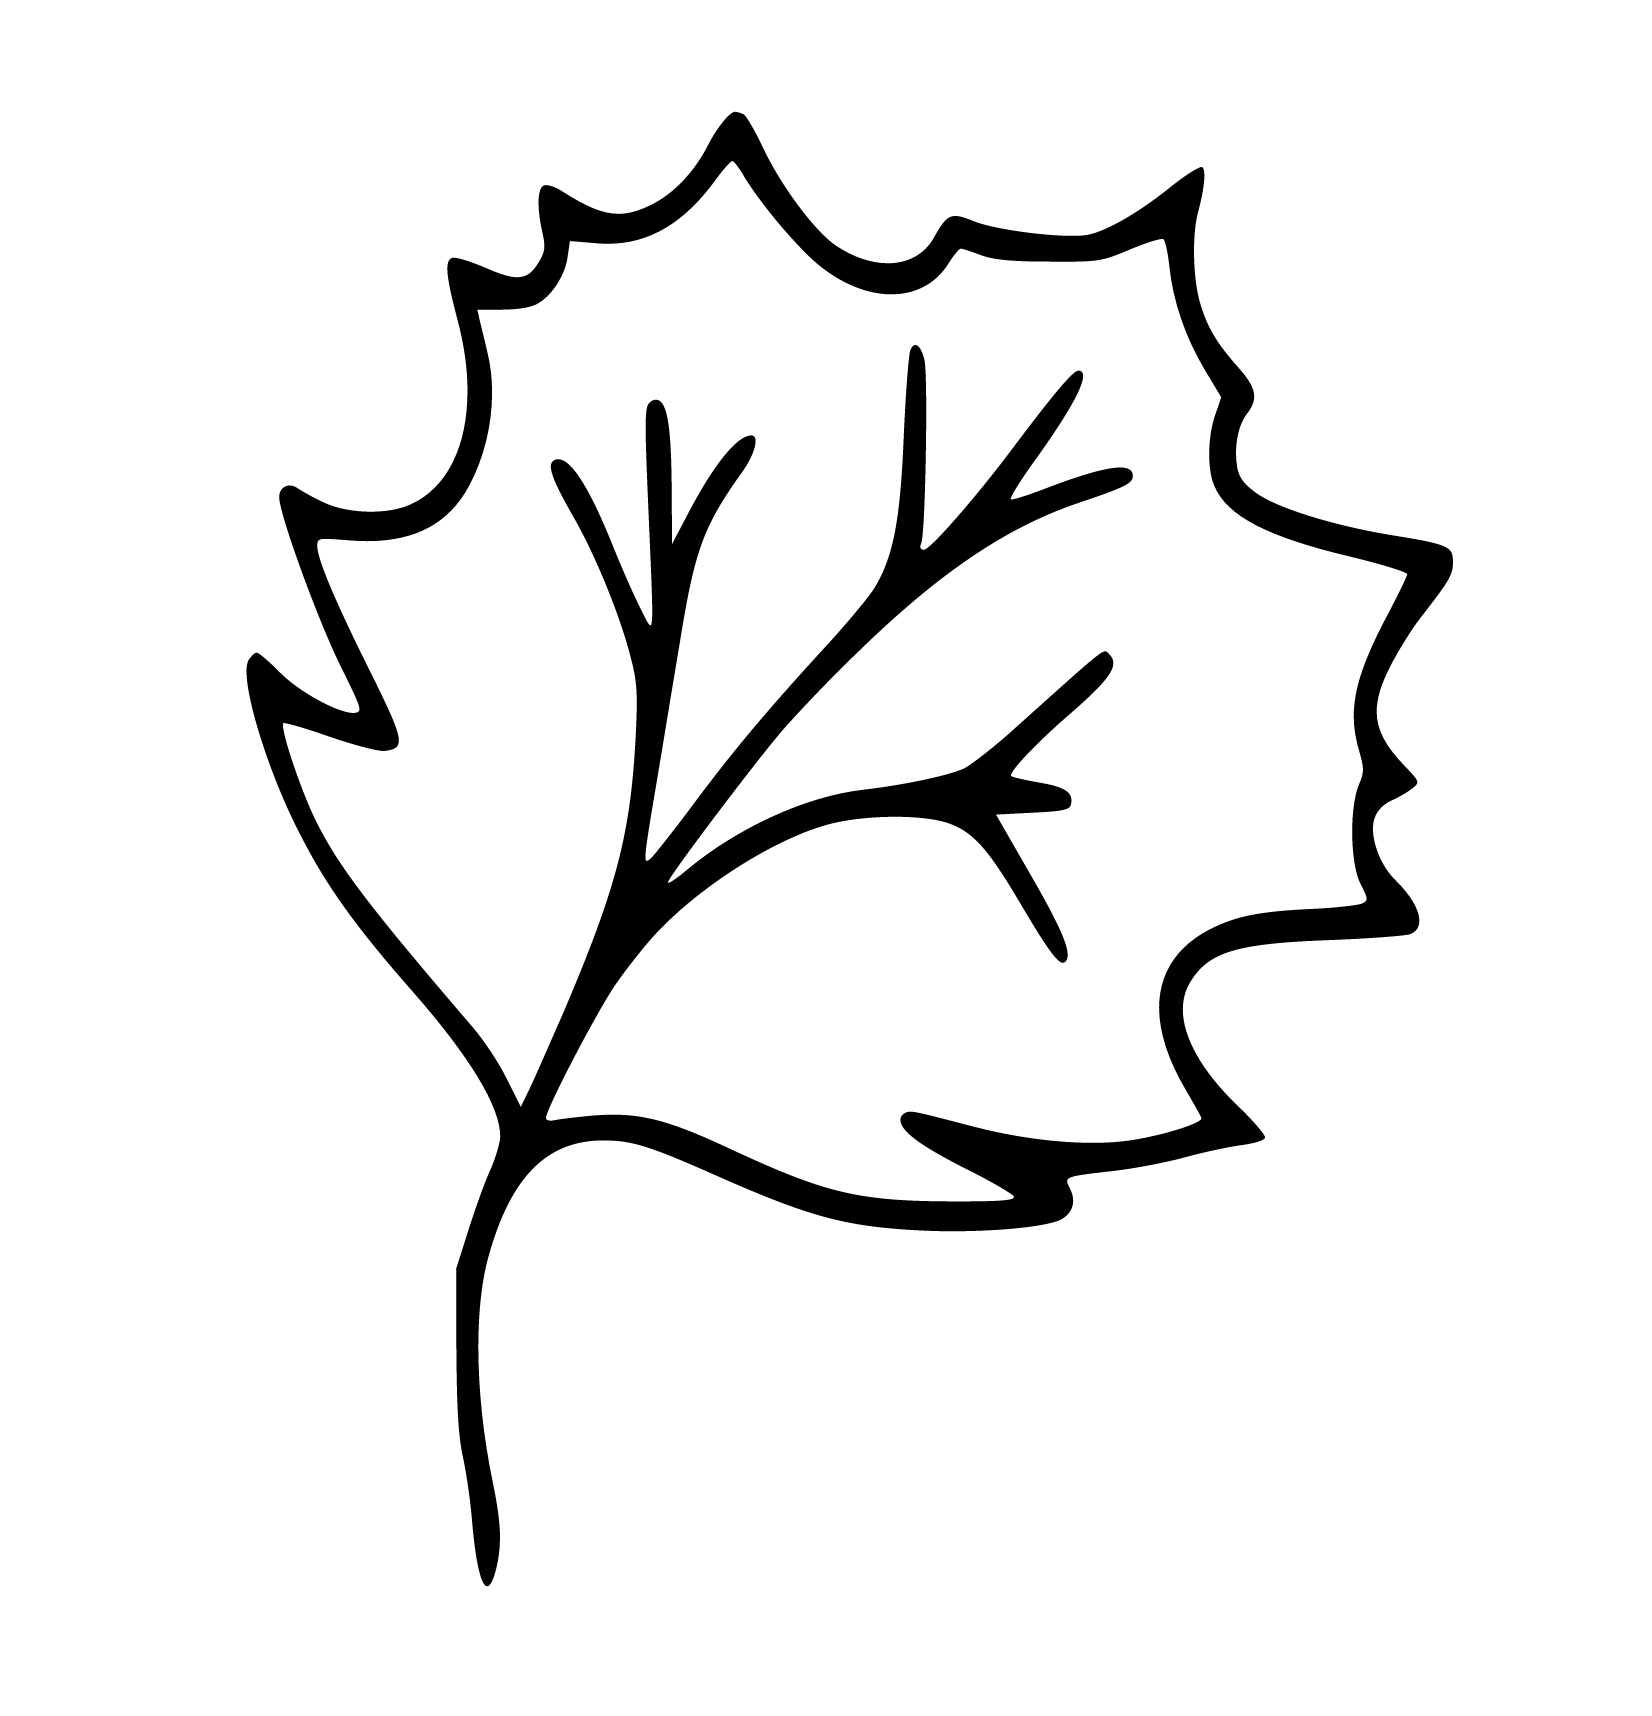 Maple Leaf Coloring Page Printable for Kids, Free, Simple and Easy, as PDF